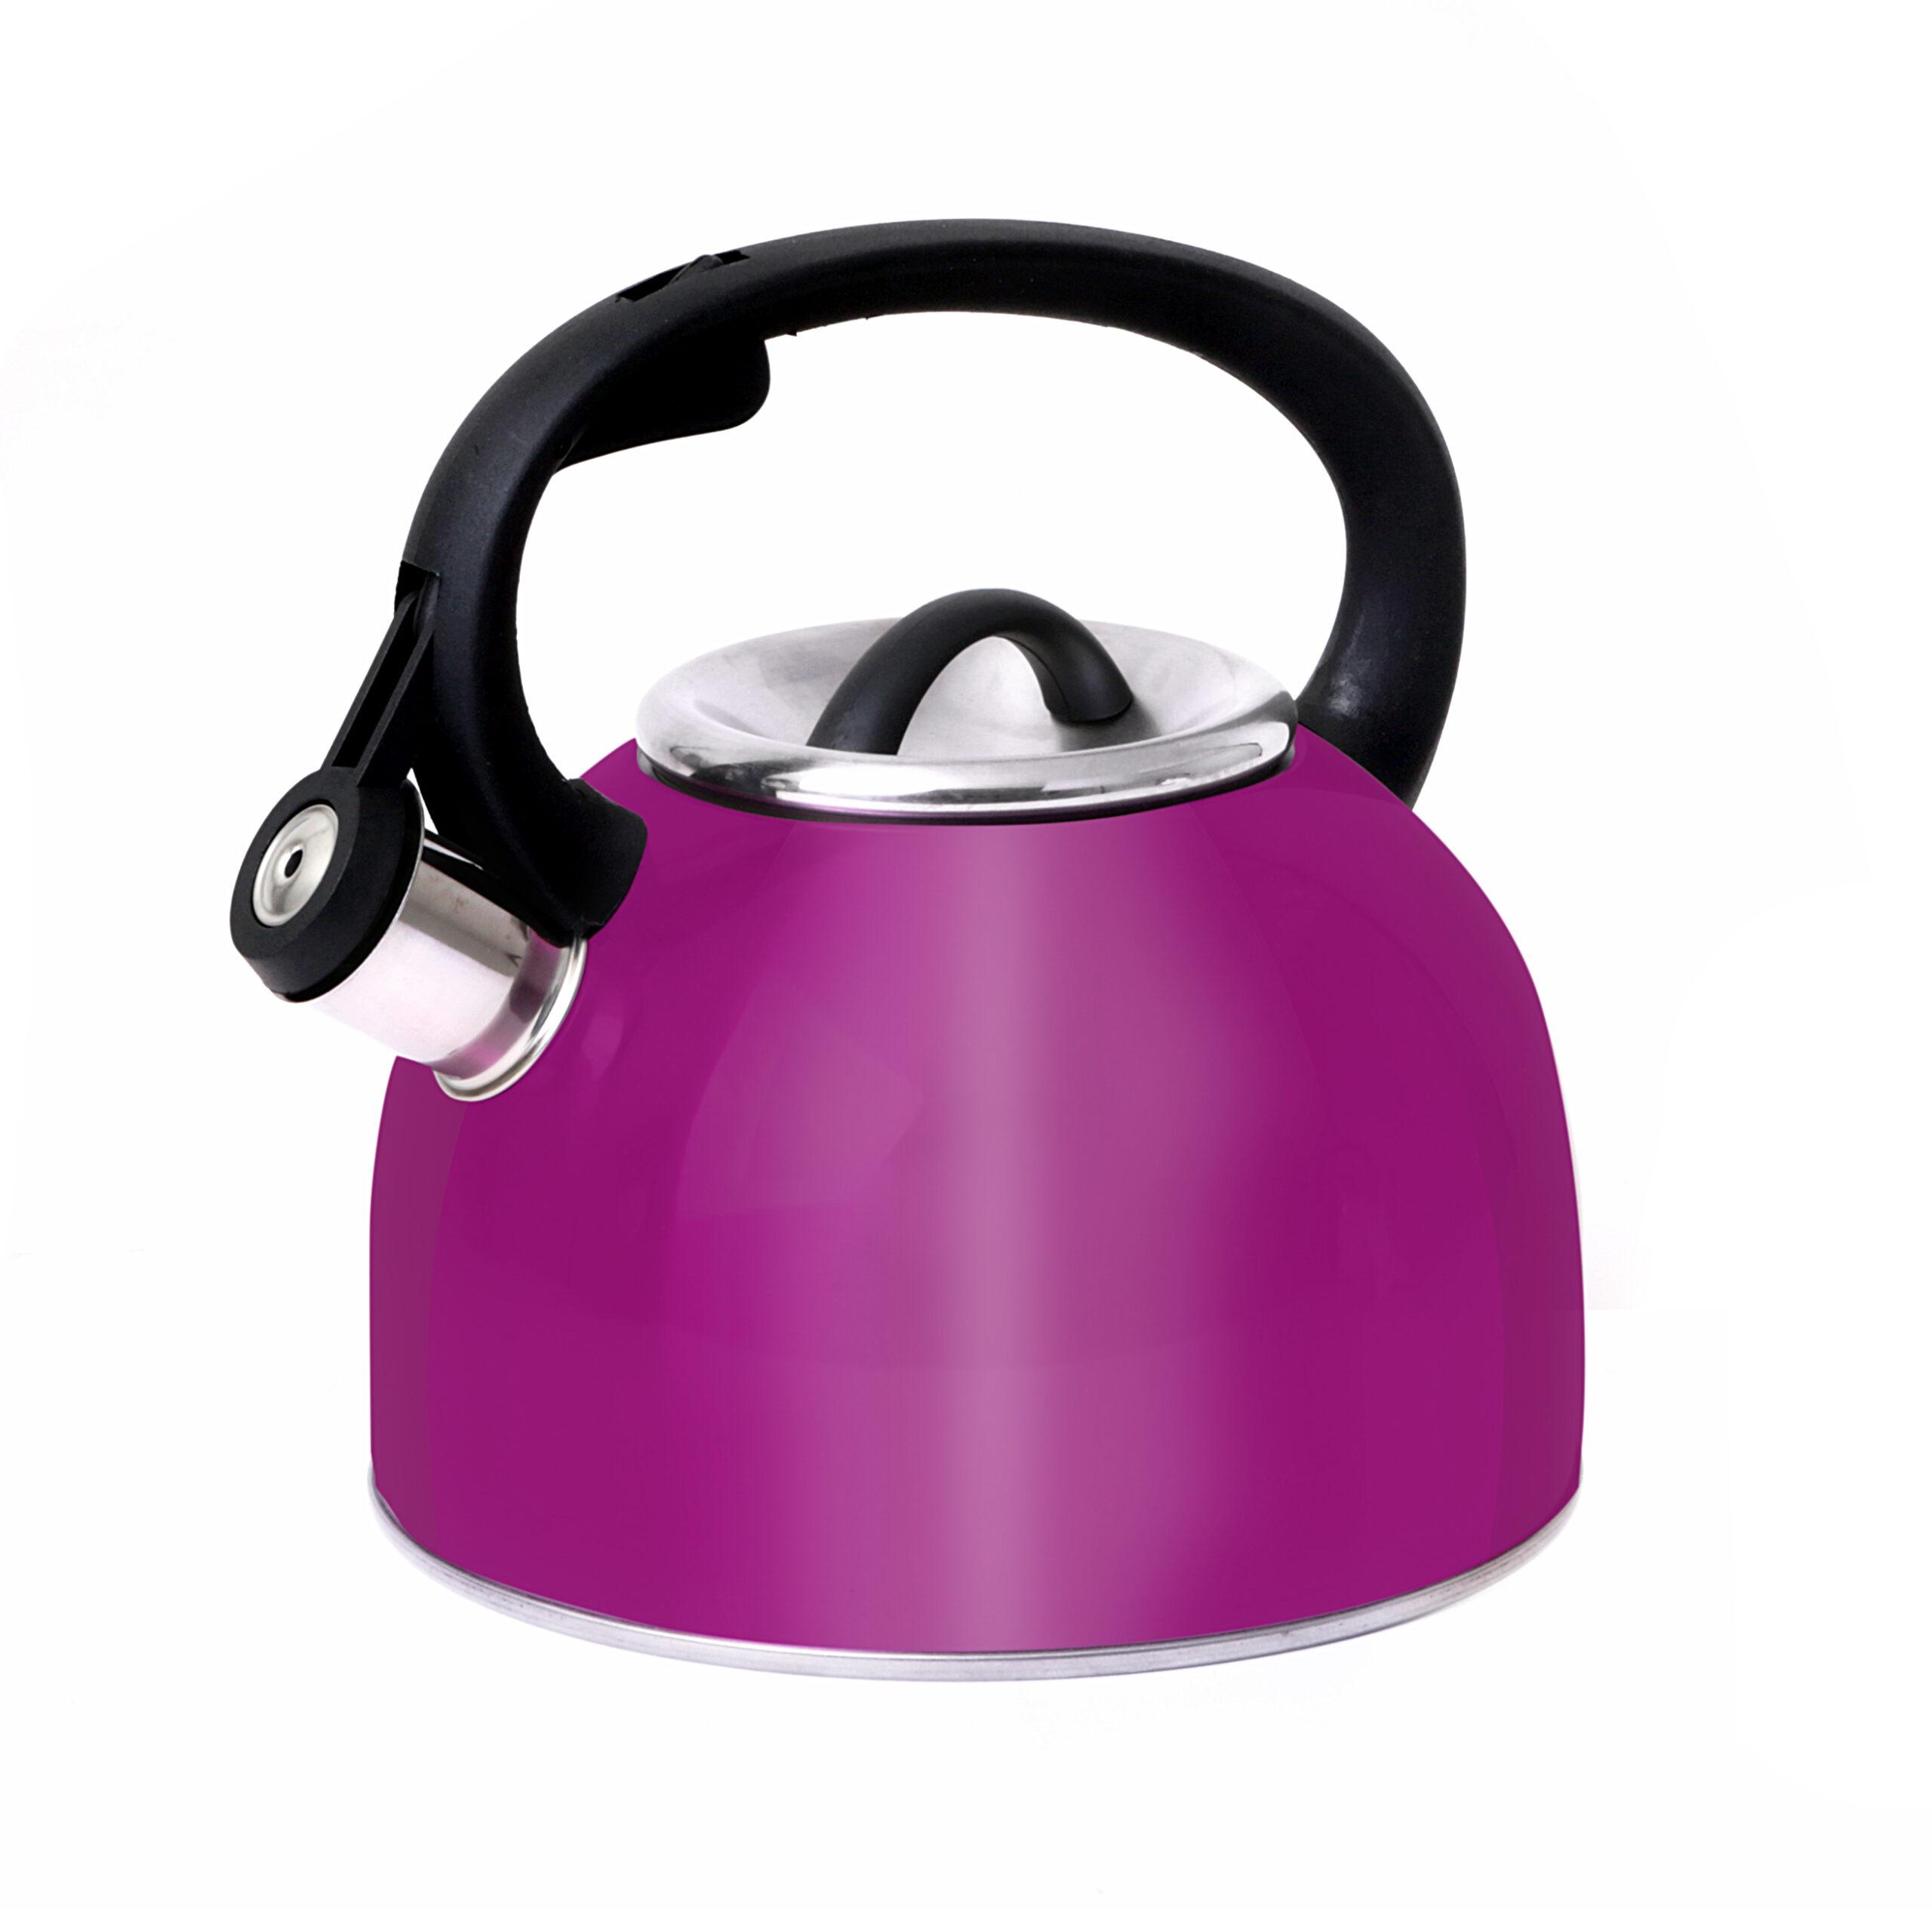 Royalford 2.5L Stainless Steel Whistling Kettle - Portable Whistling Tea Kettle with Heat Resistant Handle | Ergonomic Pouring Spout | Ideal for Tea, Coffee, Latte, Cappuccino & More